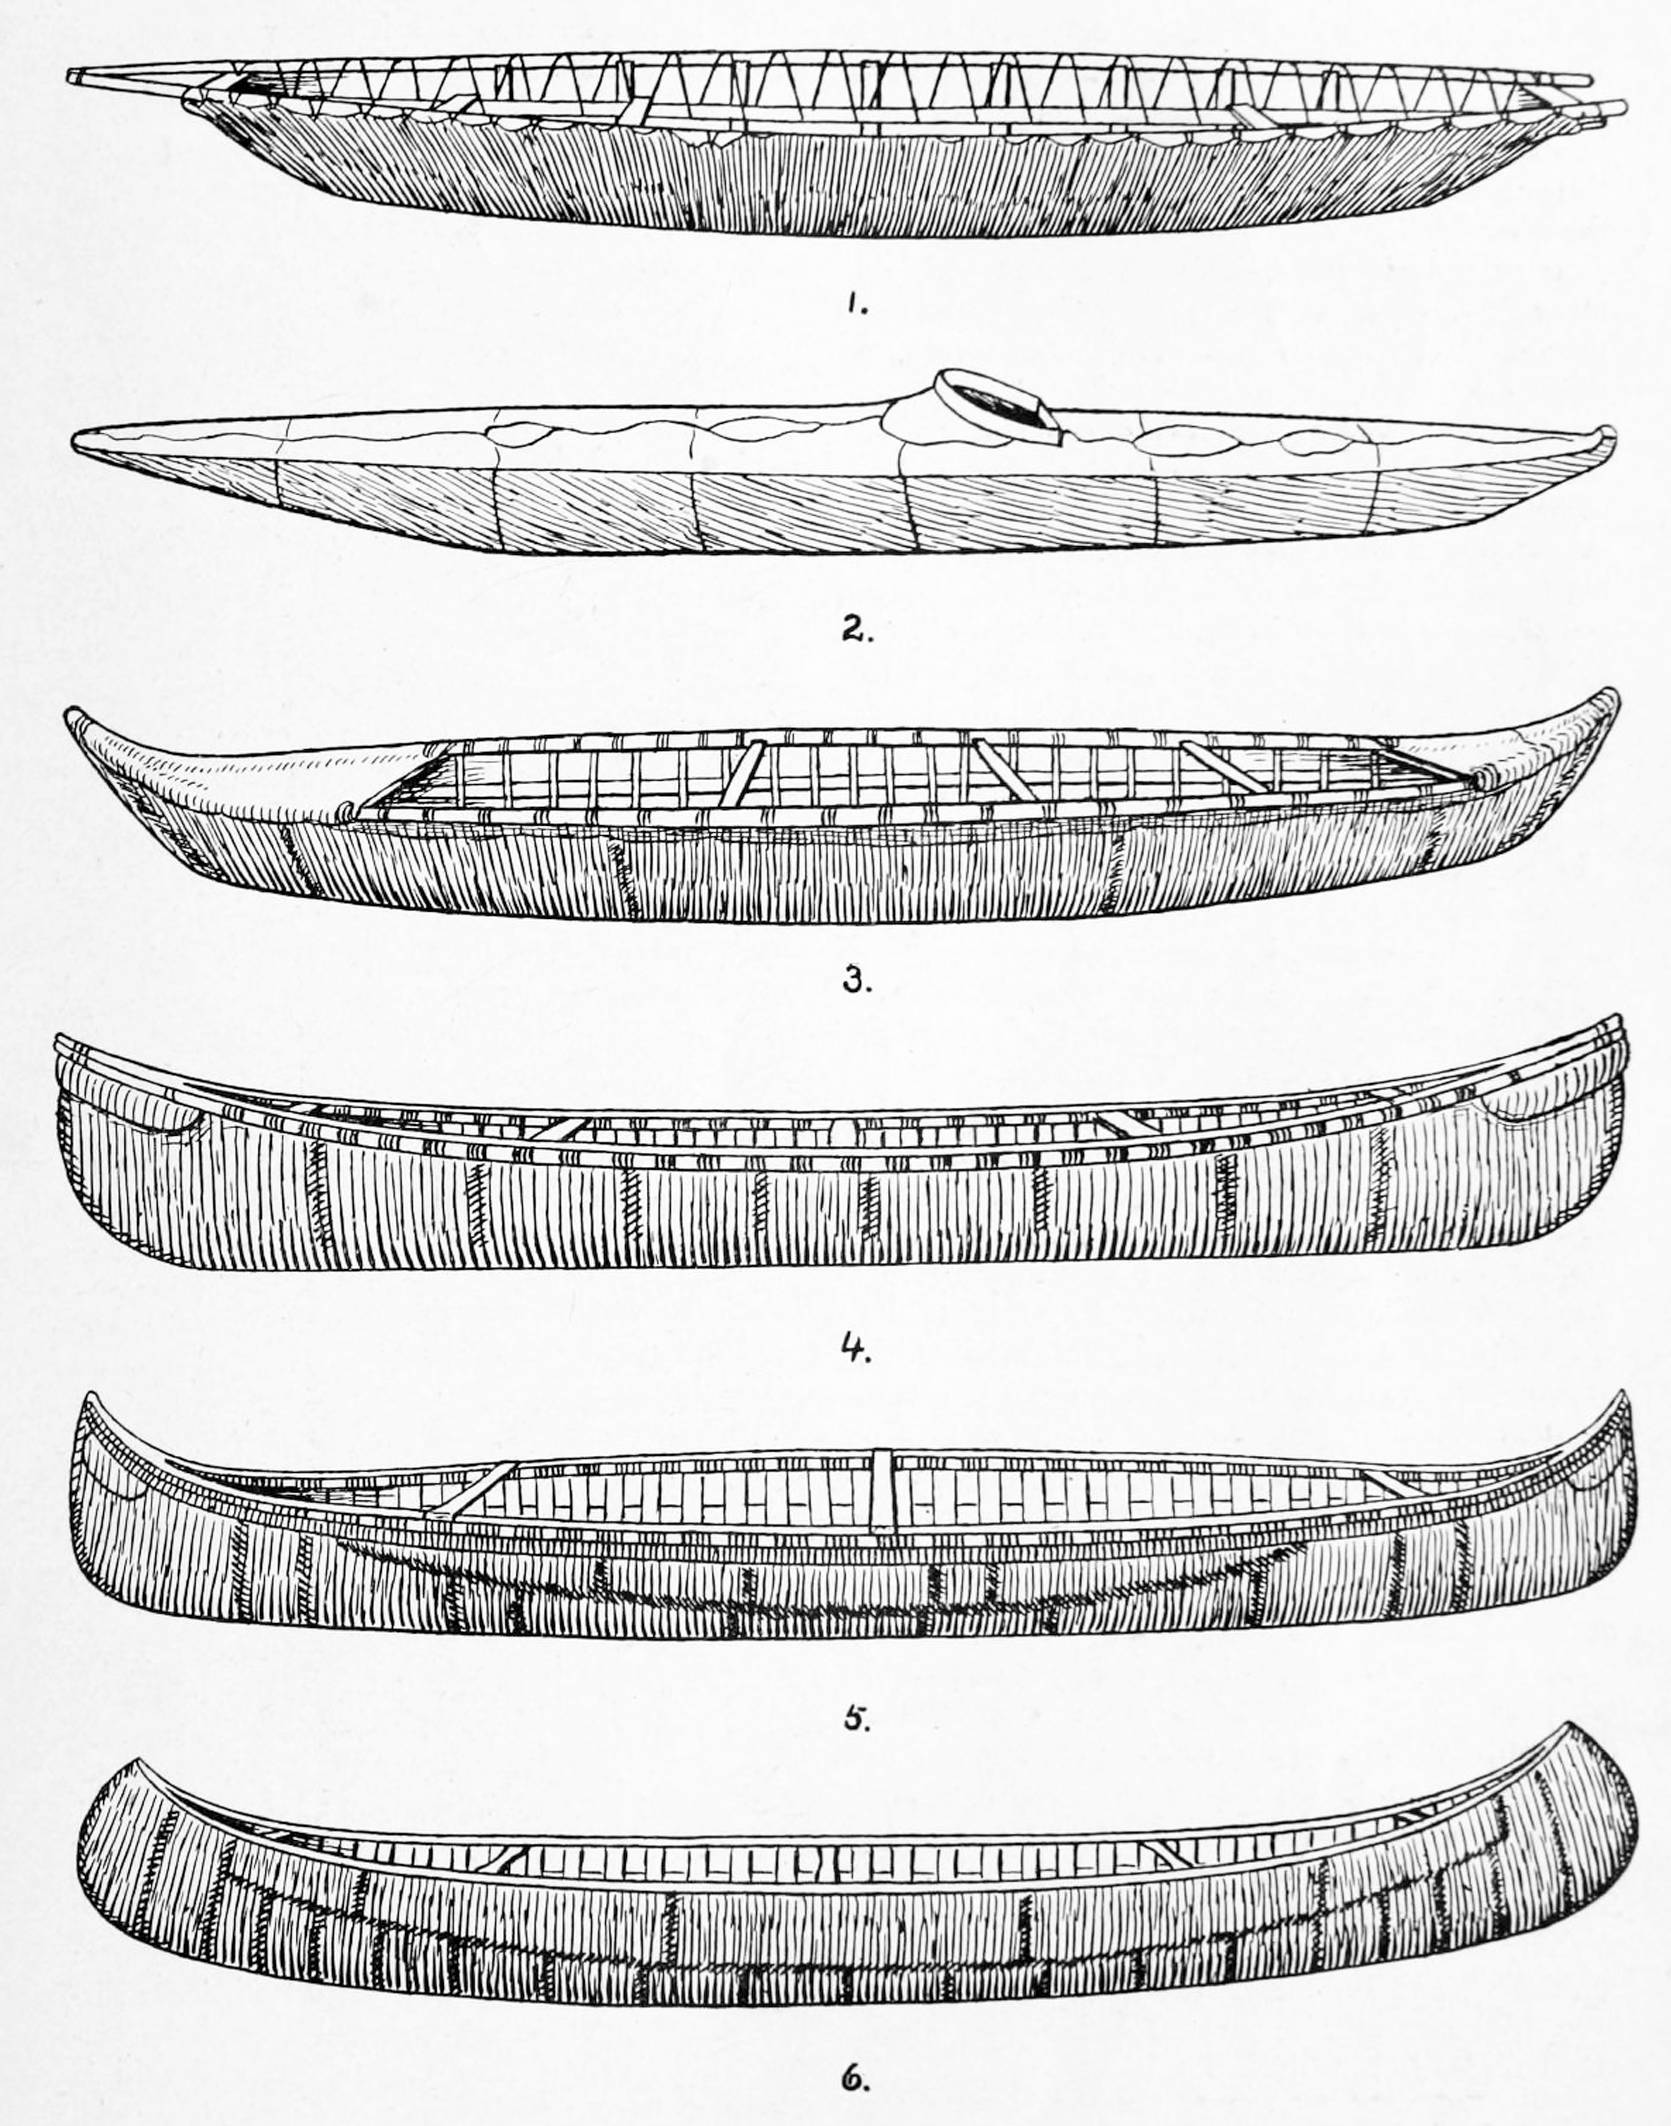 Canoe designs of the First Nations of the Pacific Northwest